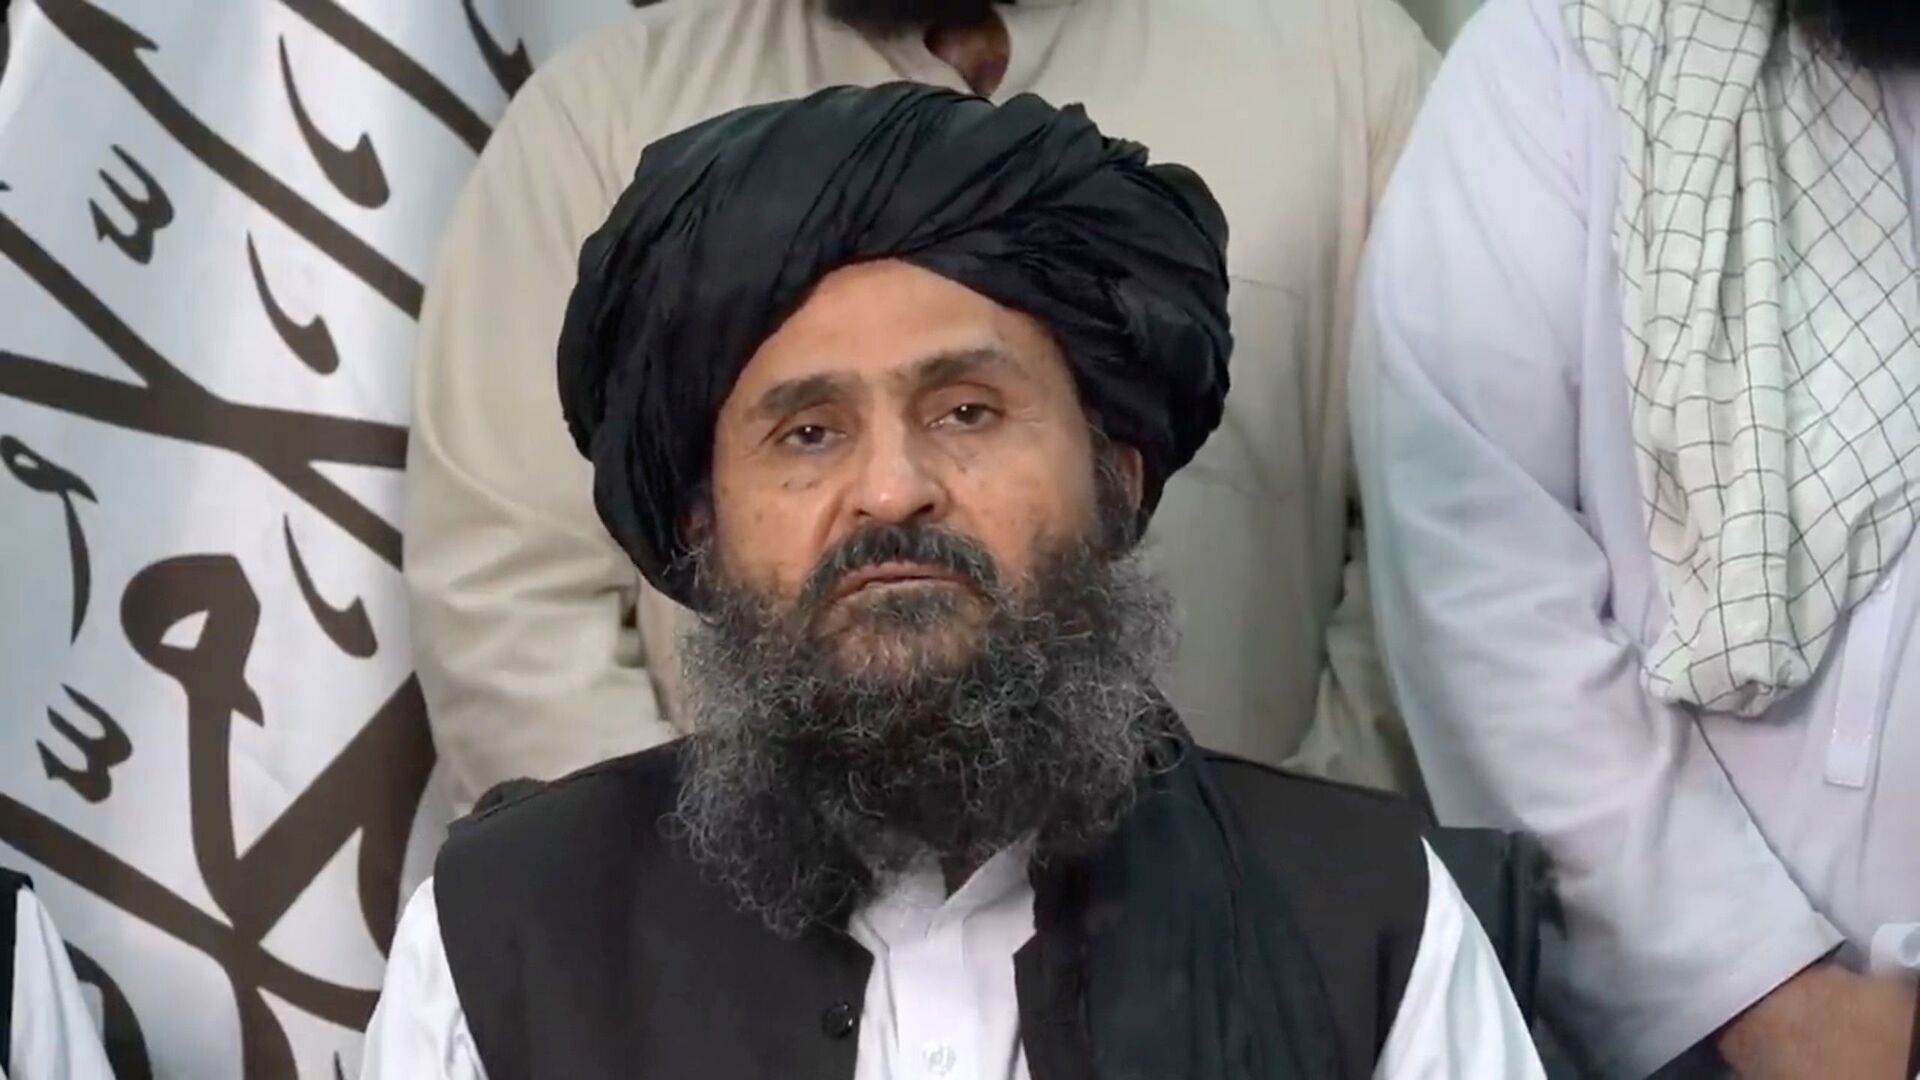 Mullah Baradar Akhund, a senior official of the Taliban, makes a video statement, in a still image taken from a video recorded in an unidentified location and released on August 16, 2021 - Sputnik International, 1920, 07.09.2021